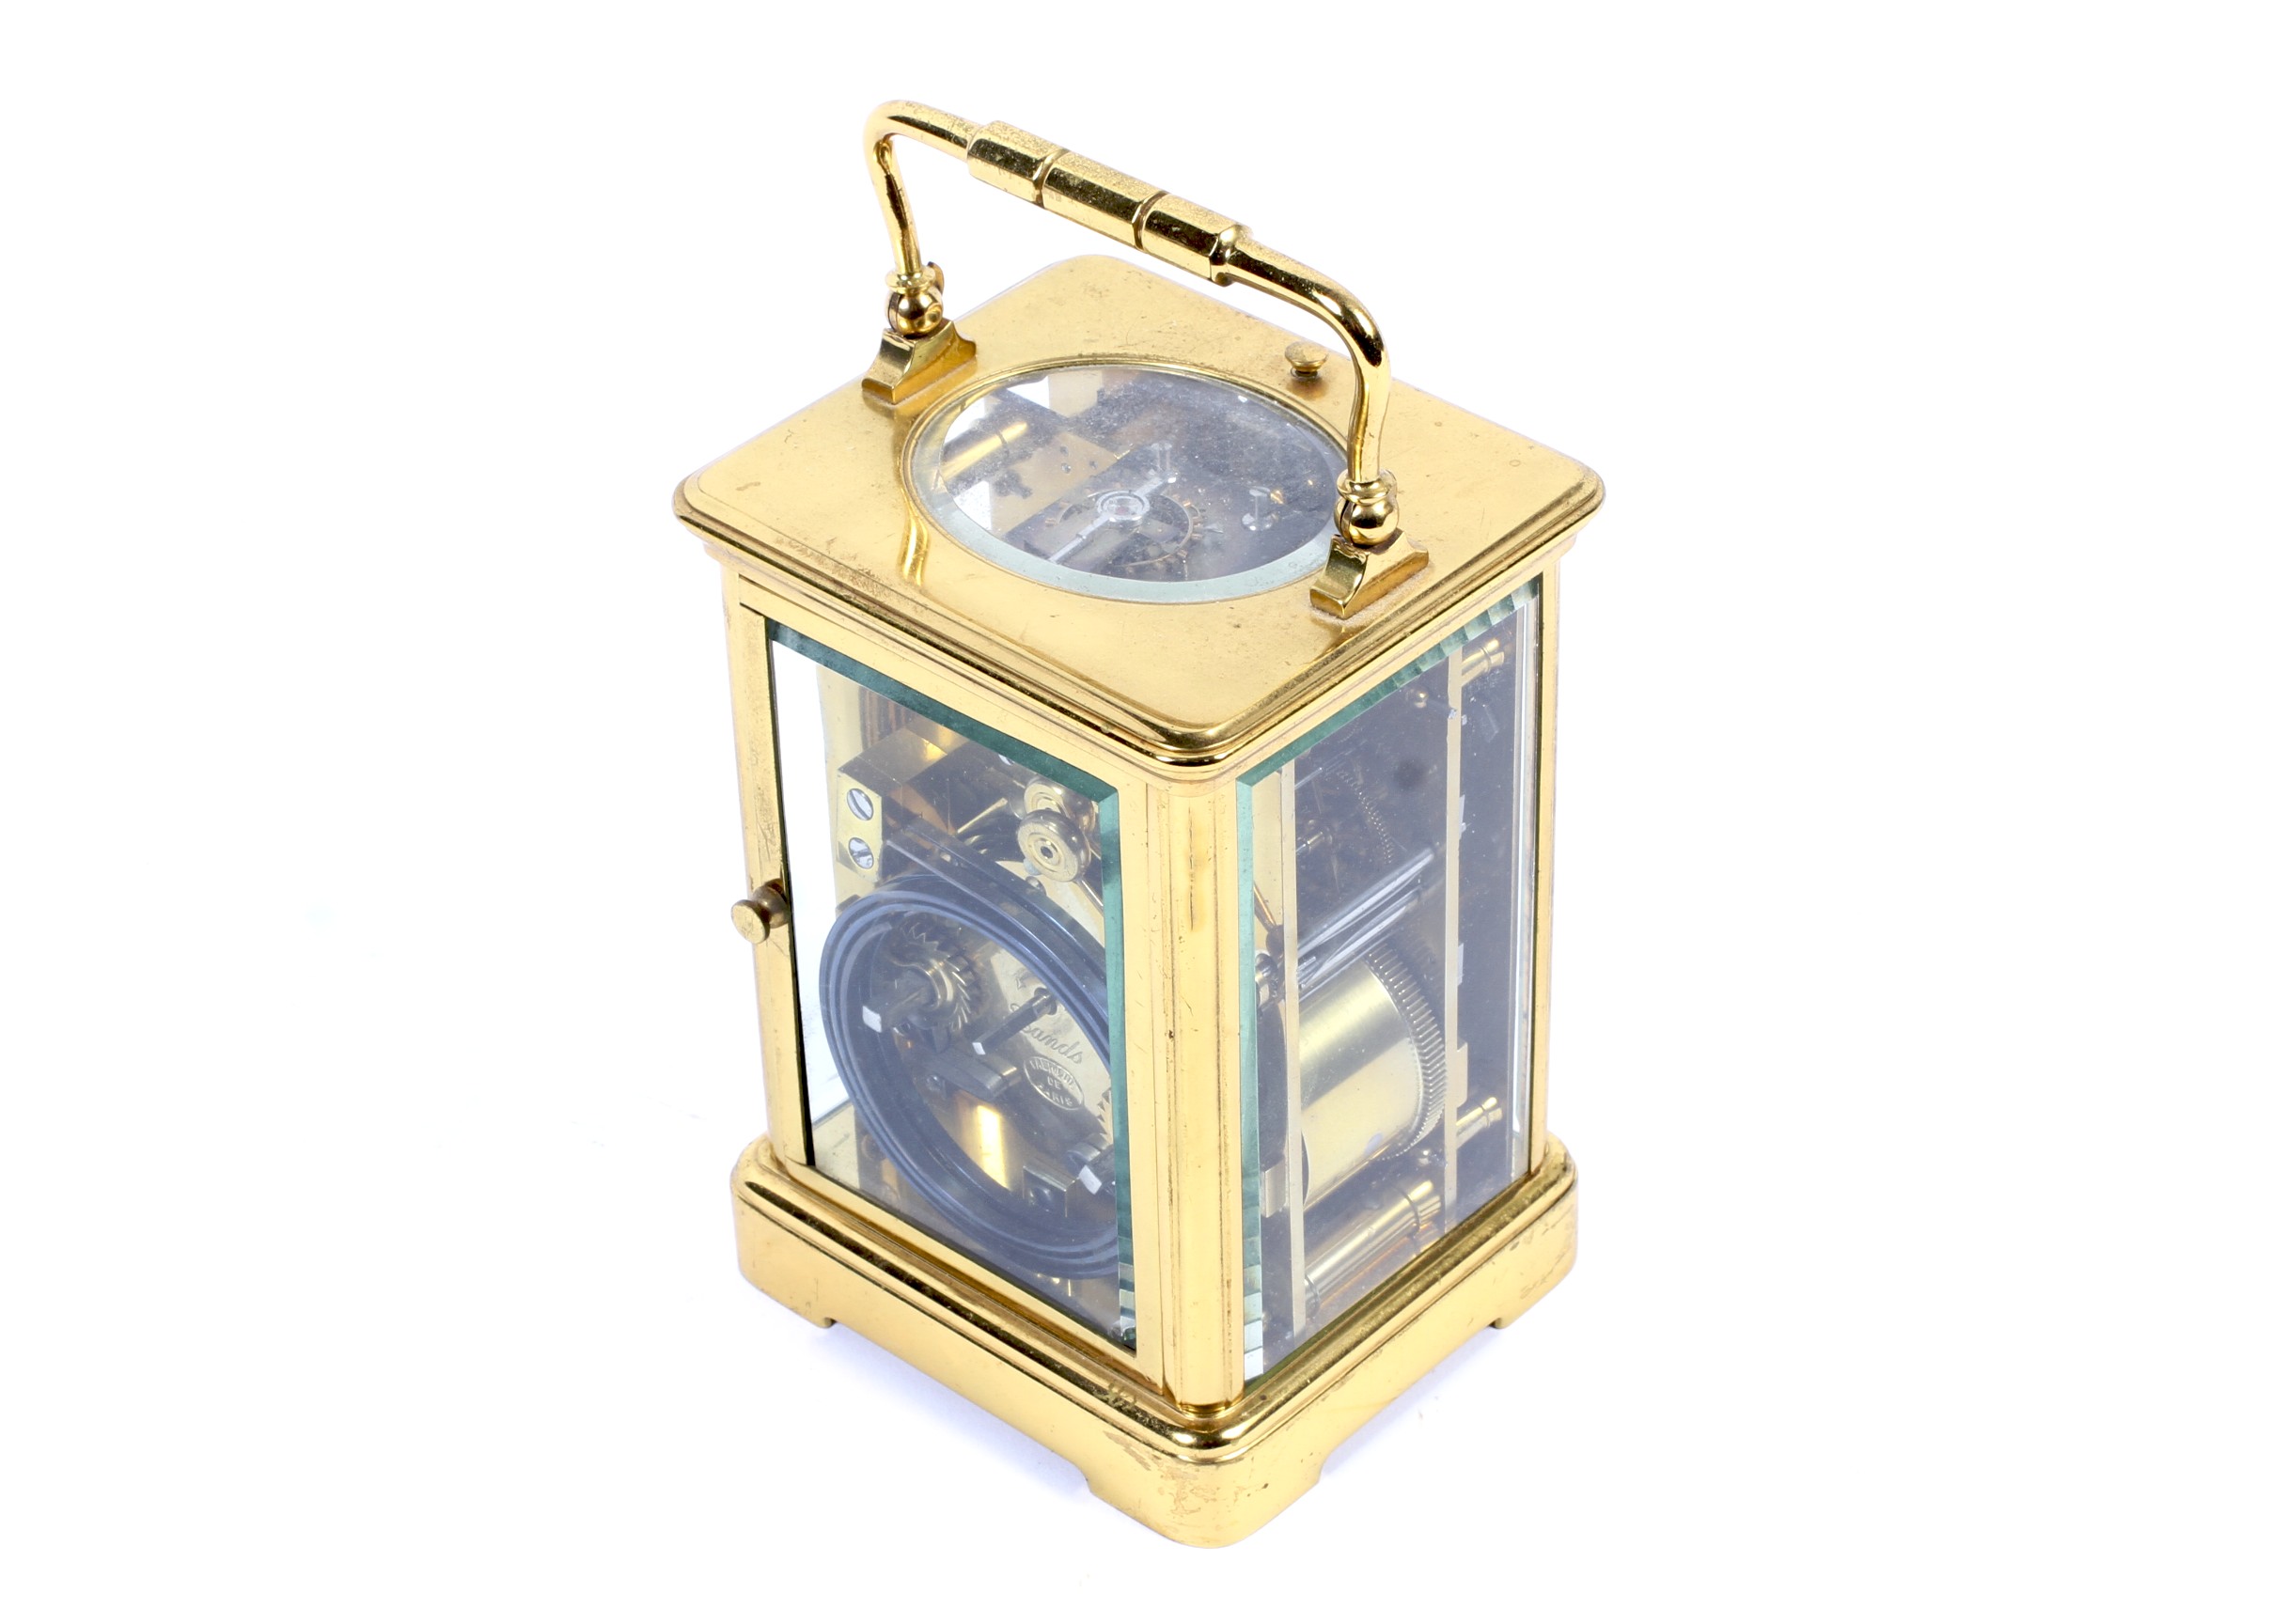 Late 19th century French brass cased carriage clock. - Image 2 of 2